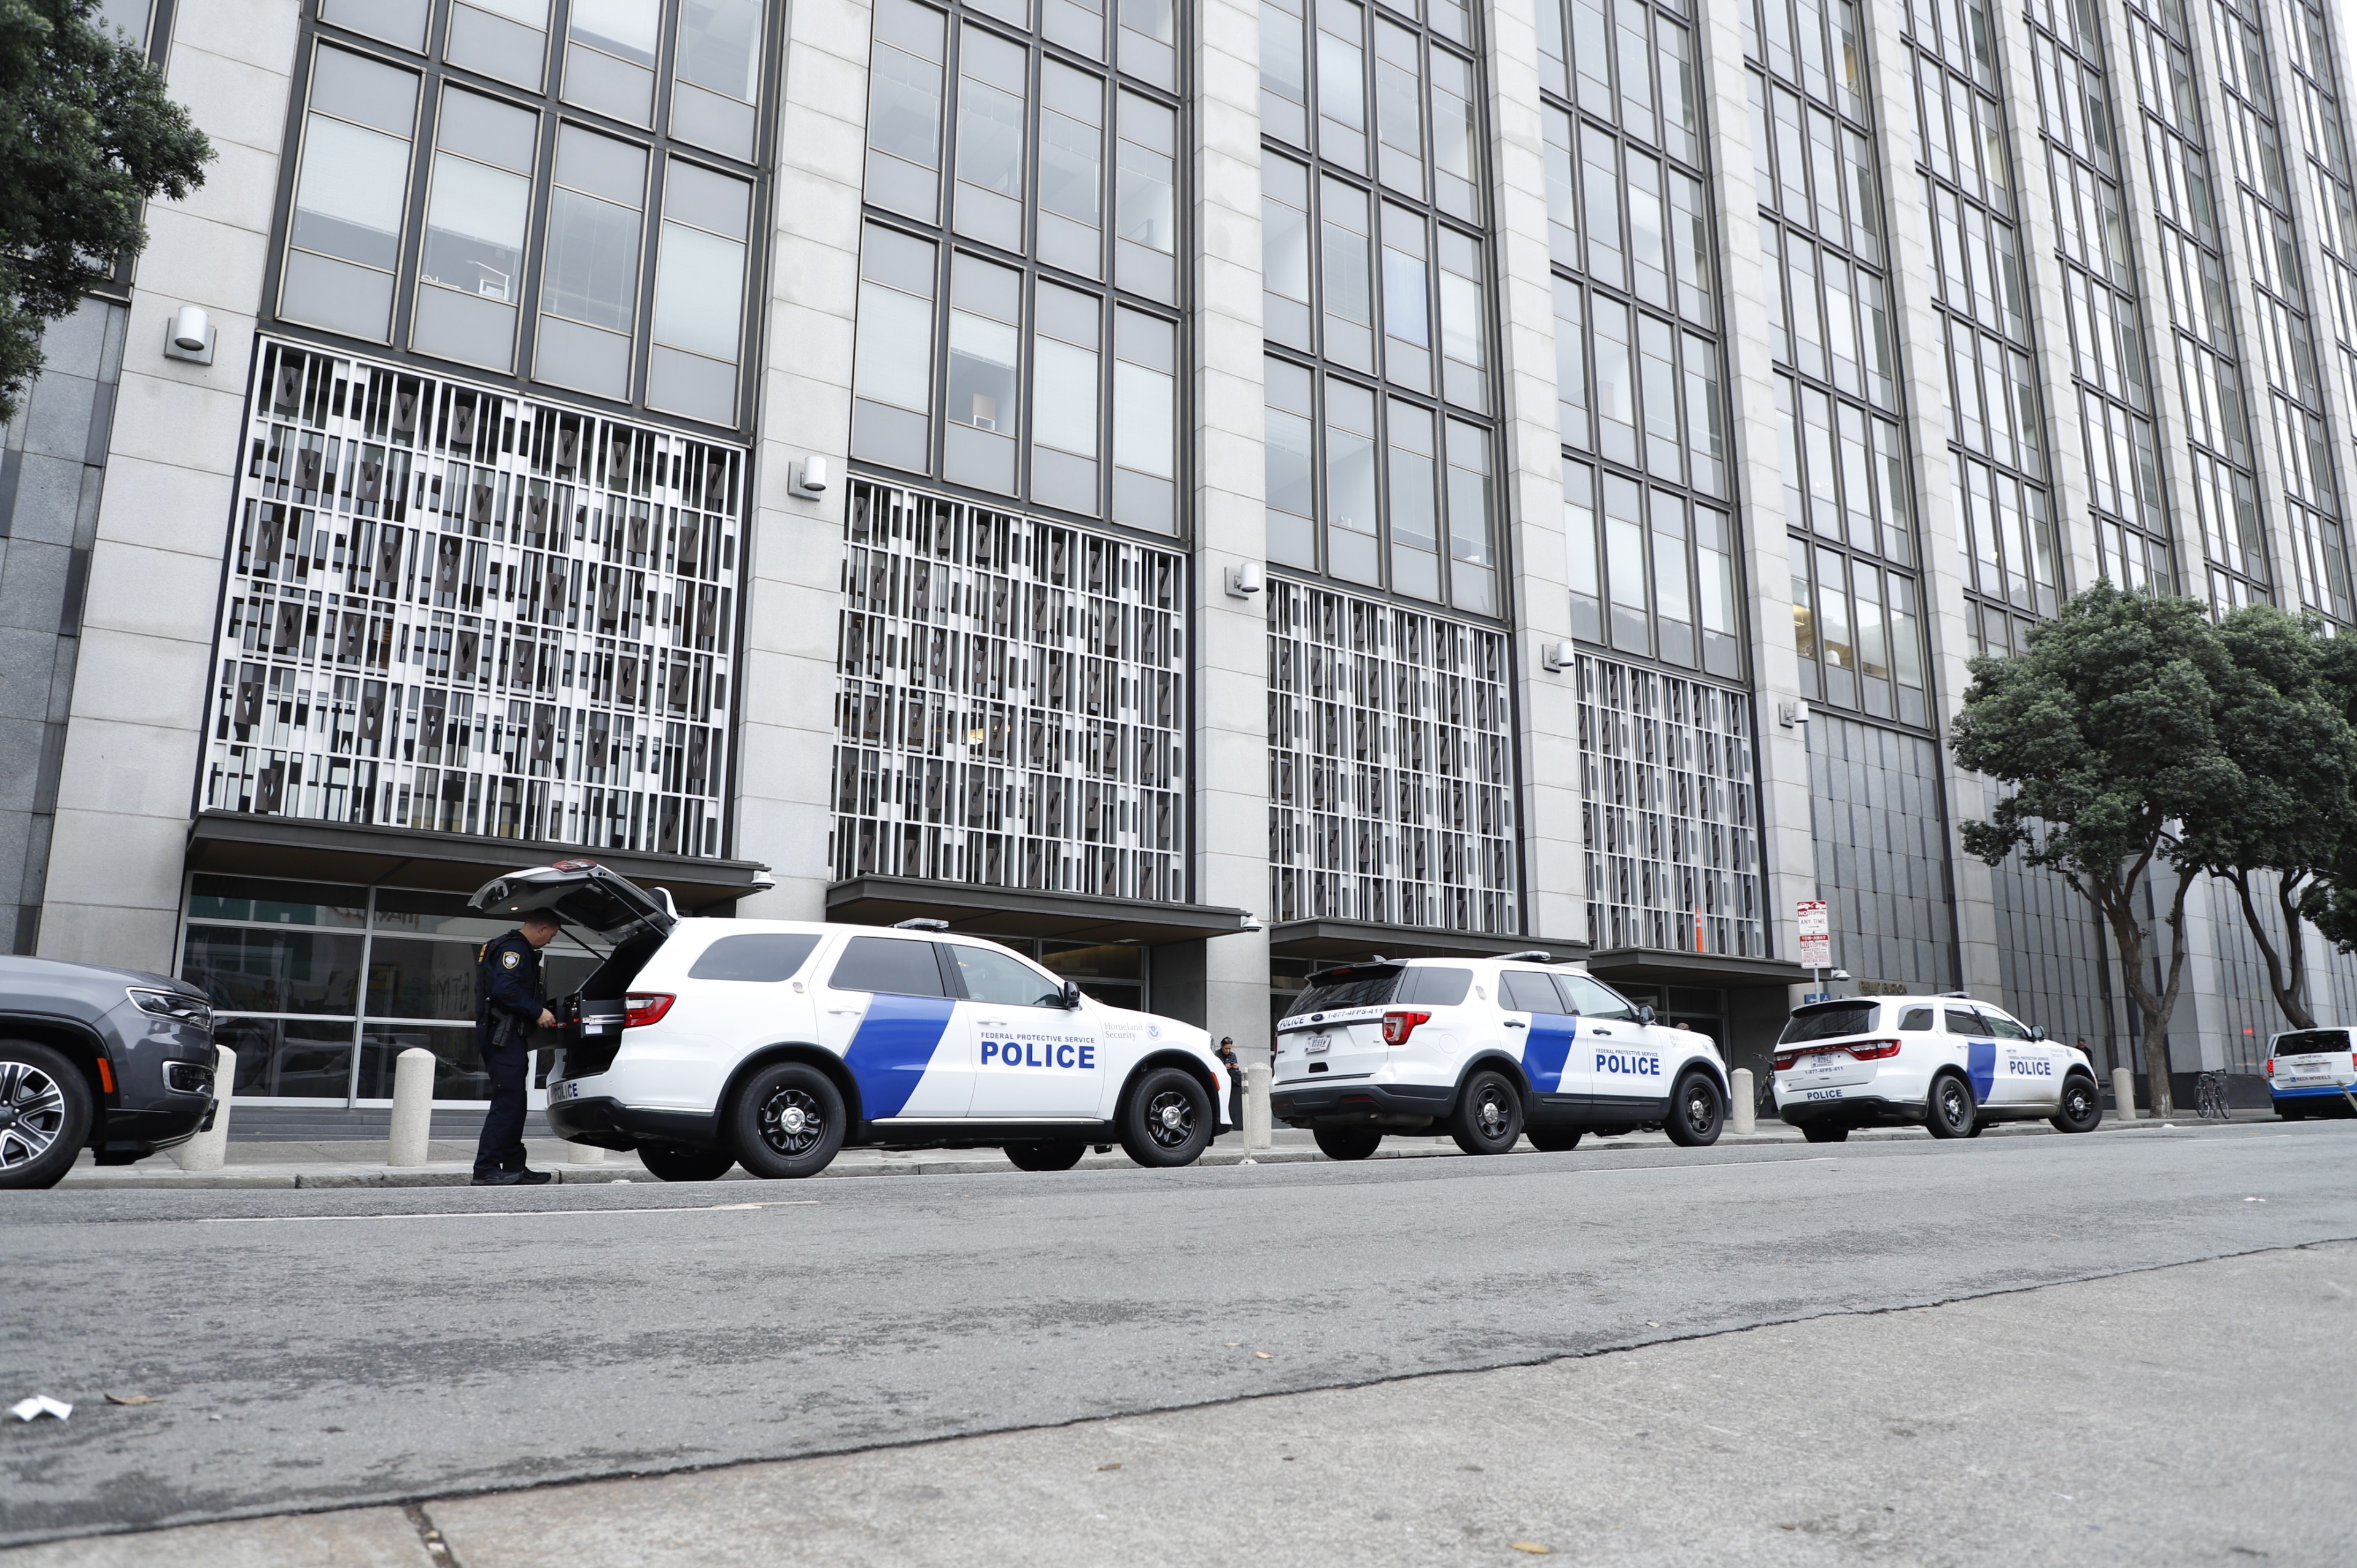 Police cars in front of a building